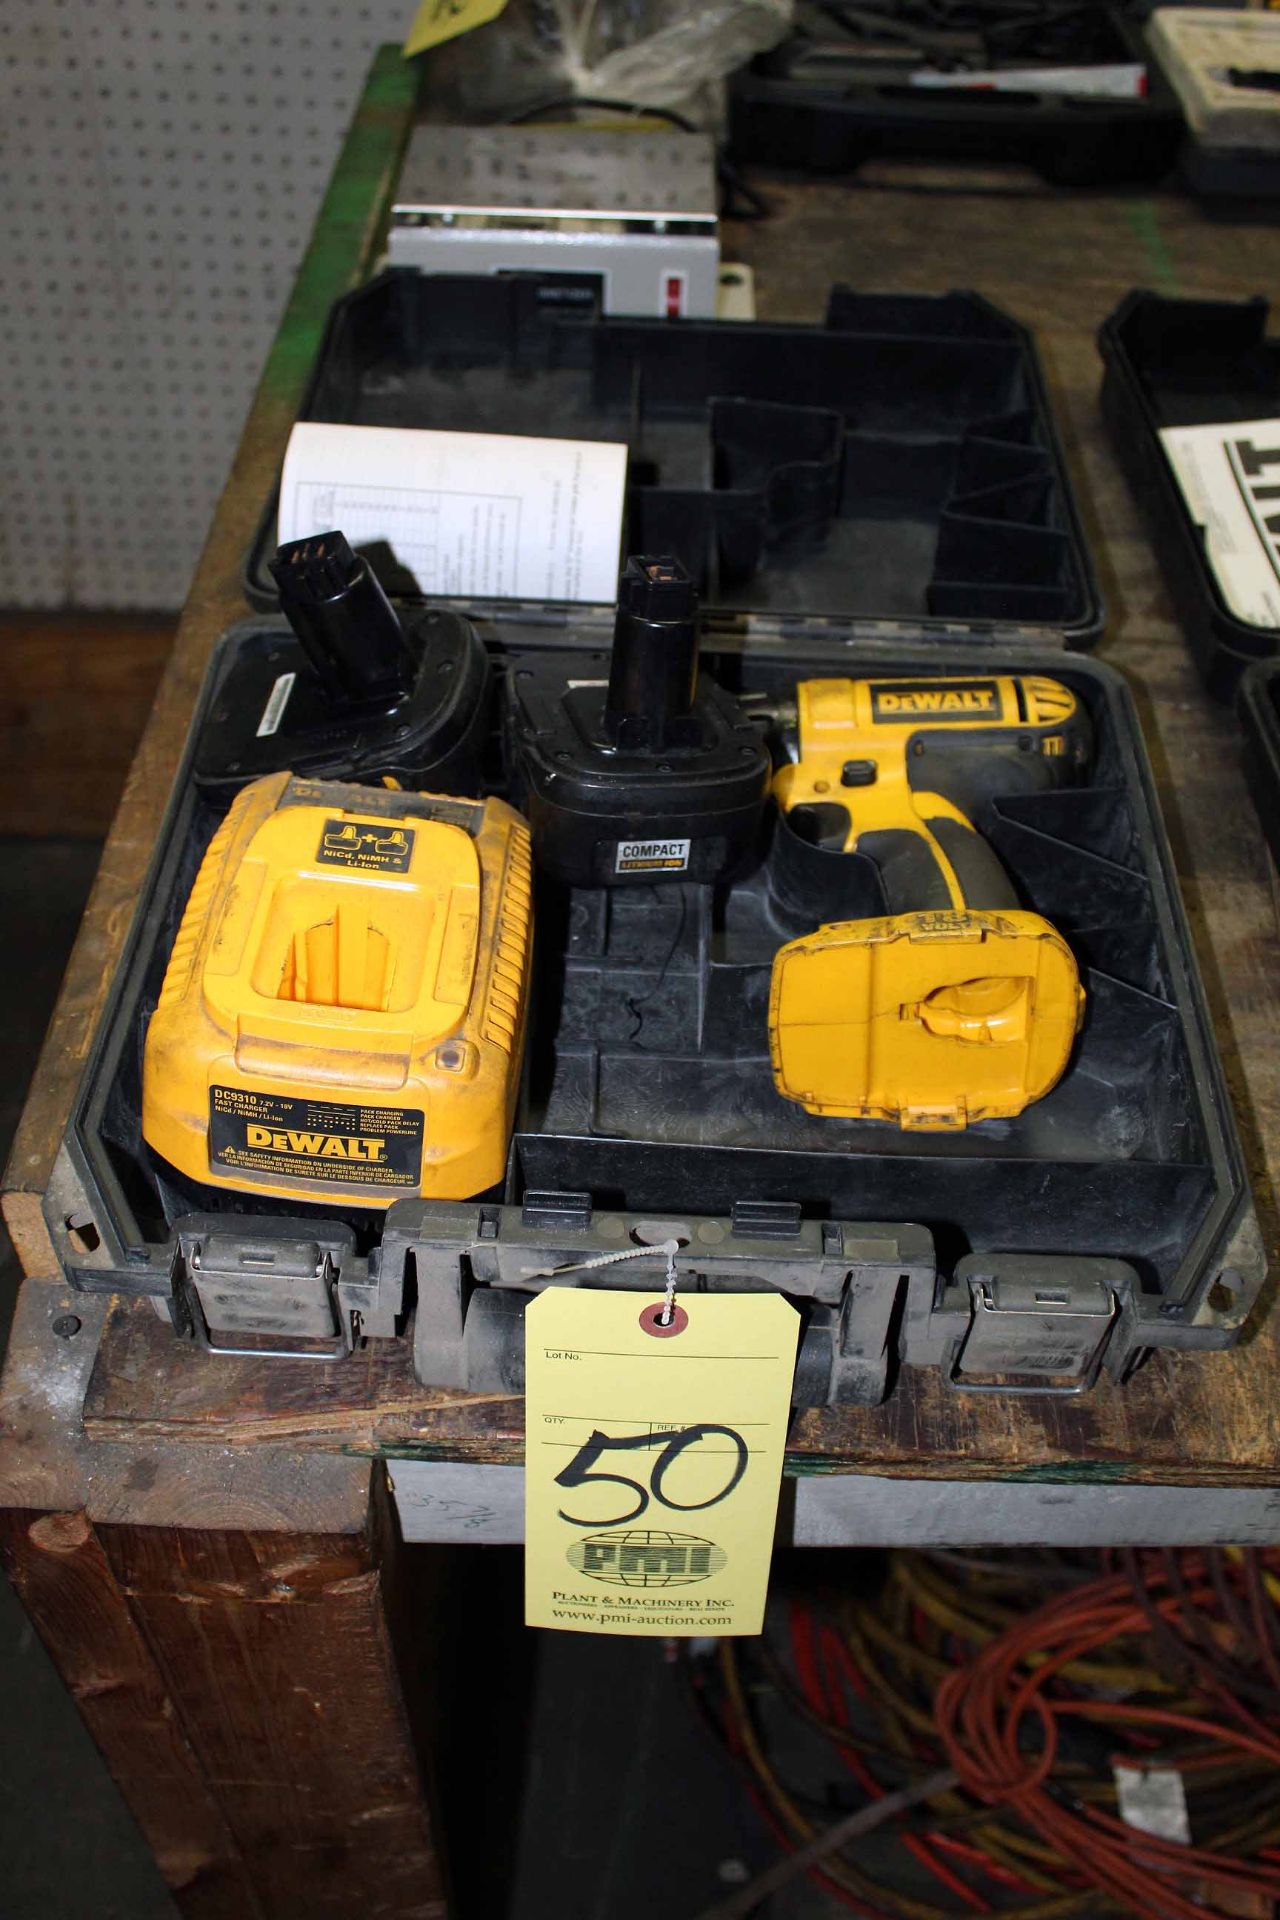 CORDLESS DRILL, DEWALT, 18 V. lithium, w/battery & charger